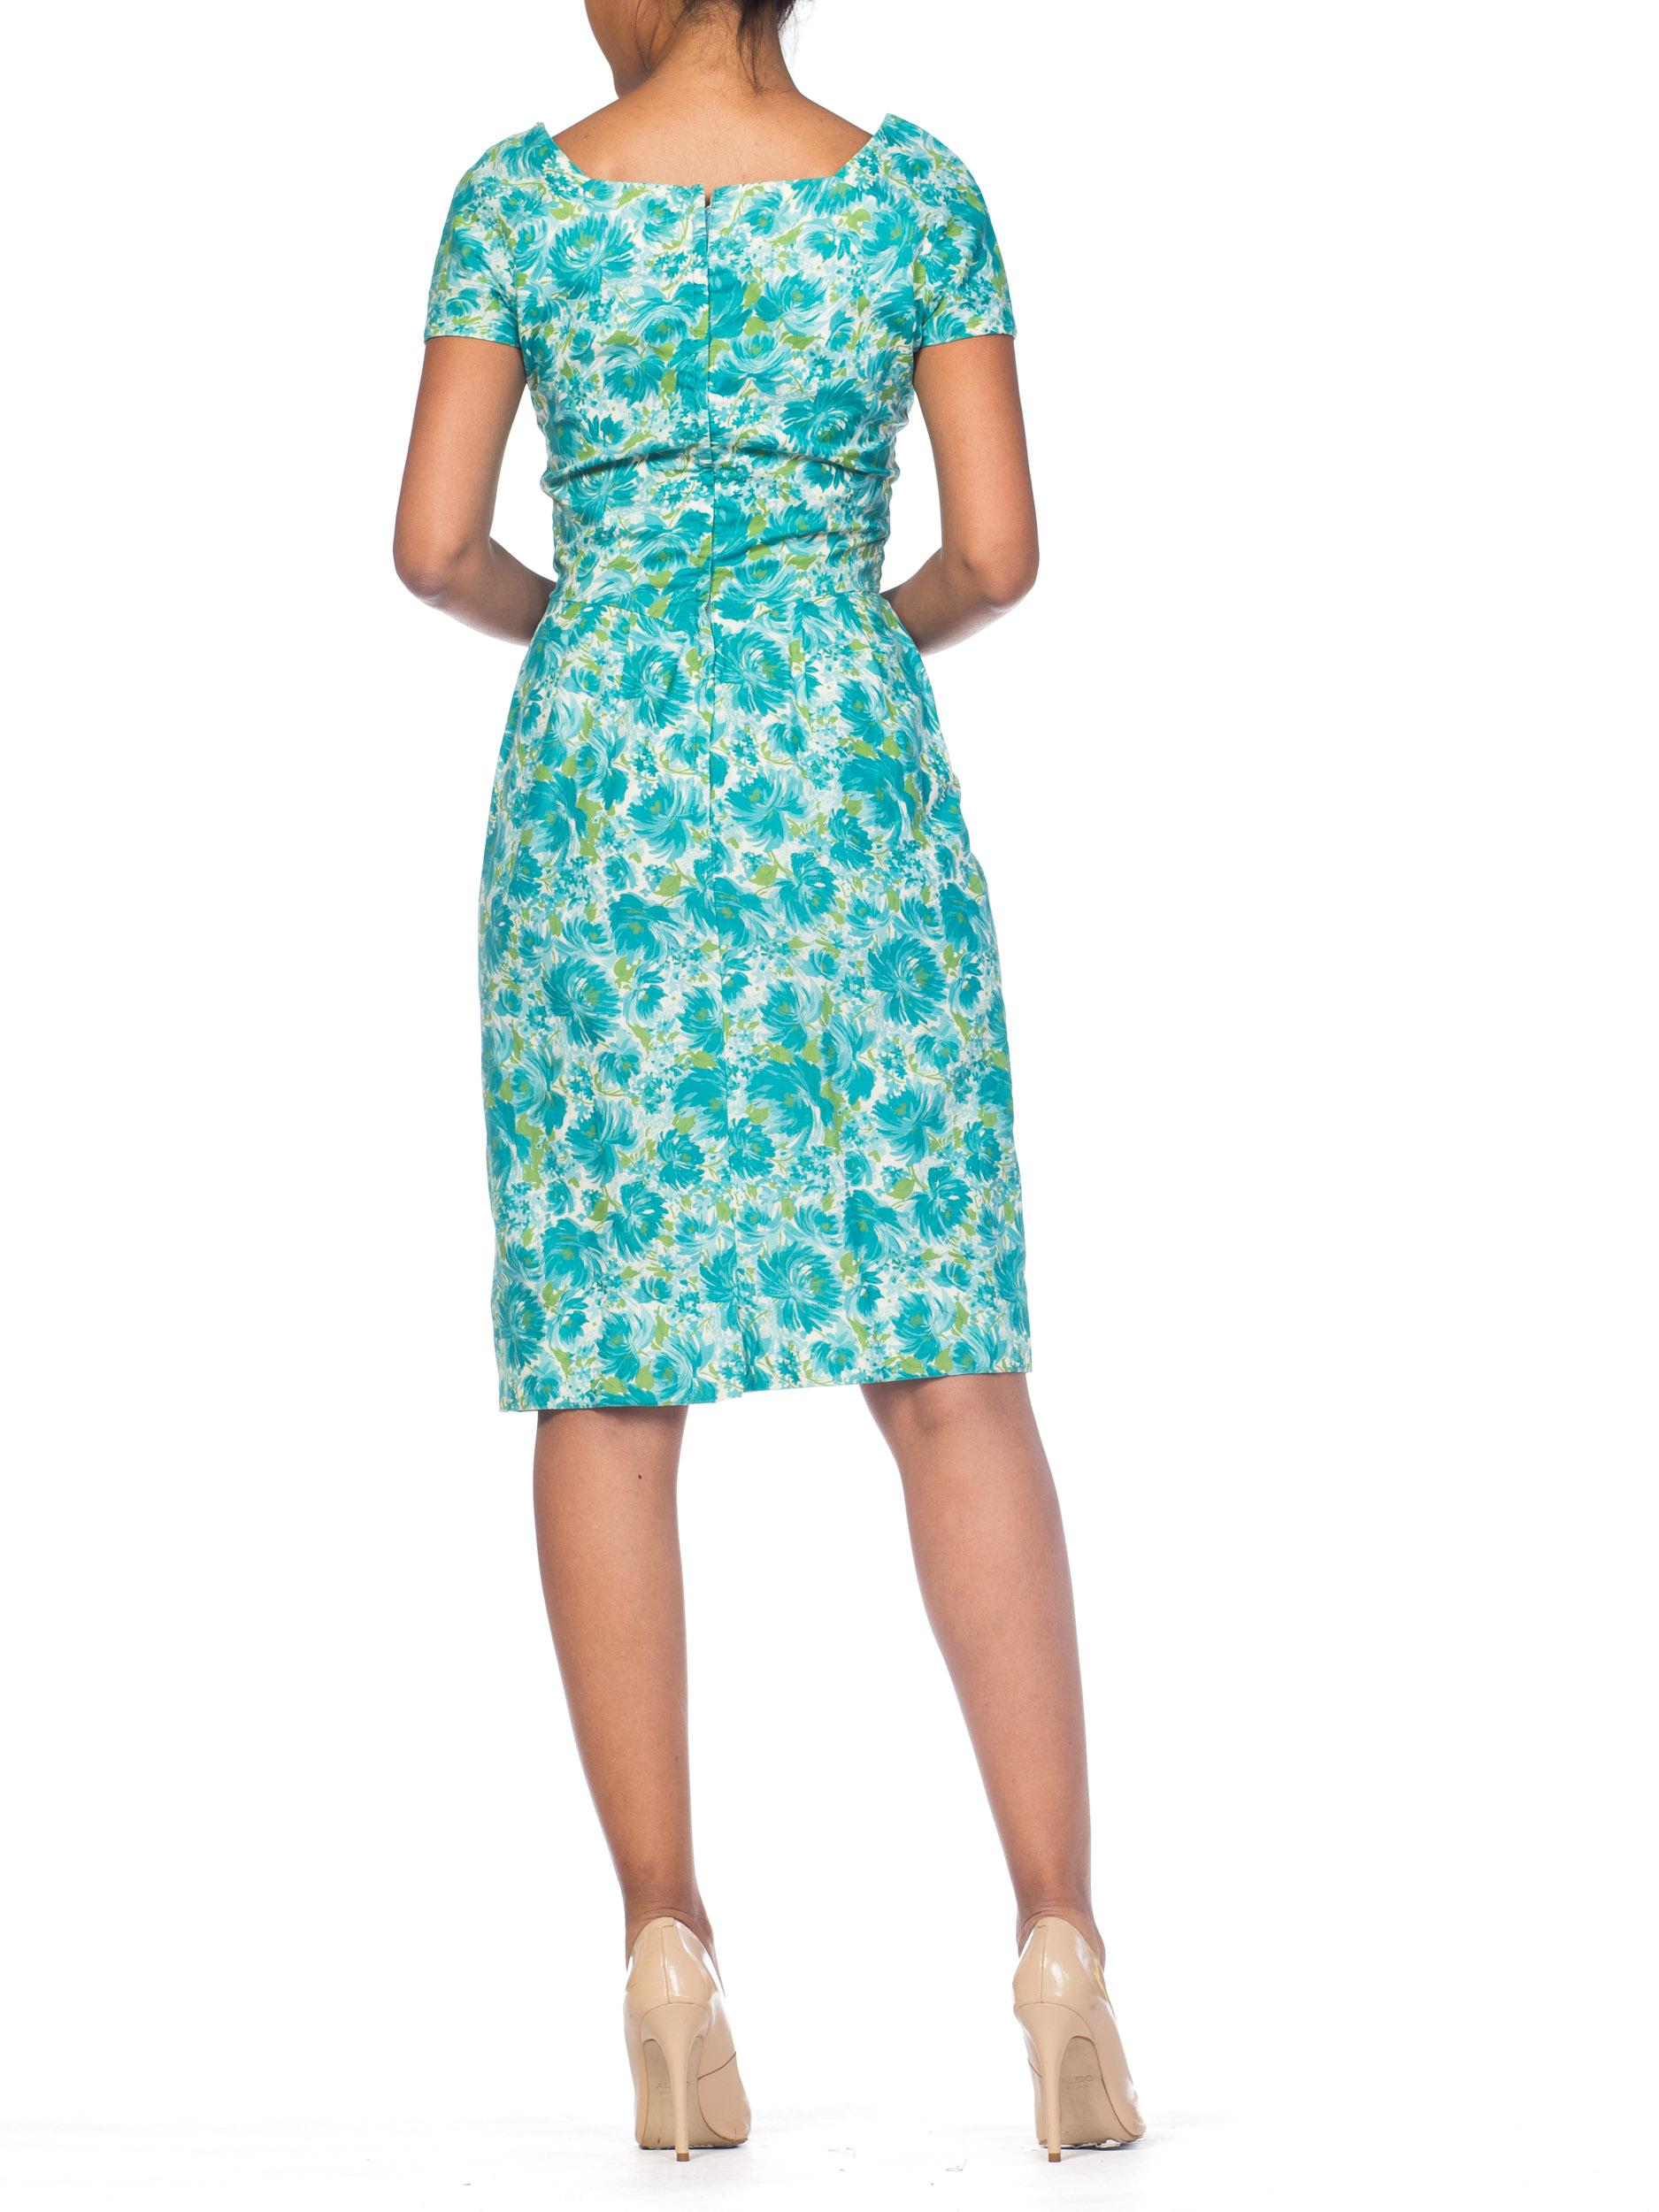 1950S Blue & Green Floral Cotton Dress With Draped Vava-Voom Neckline For Sale 3